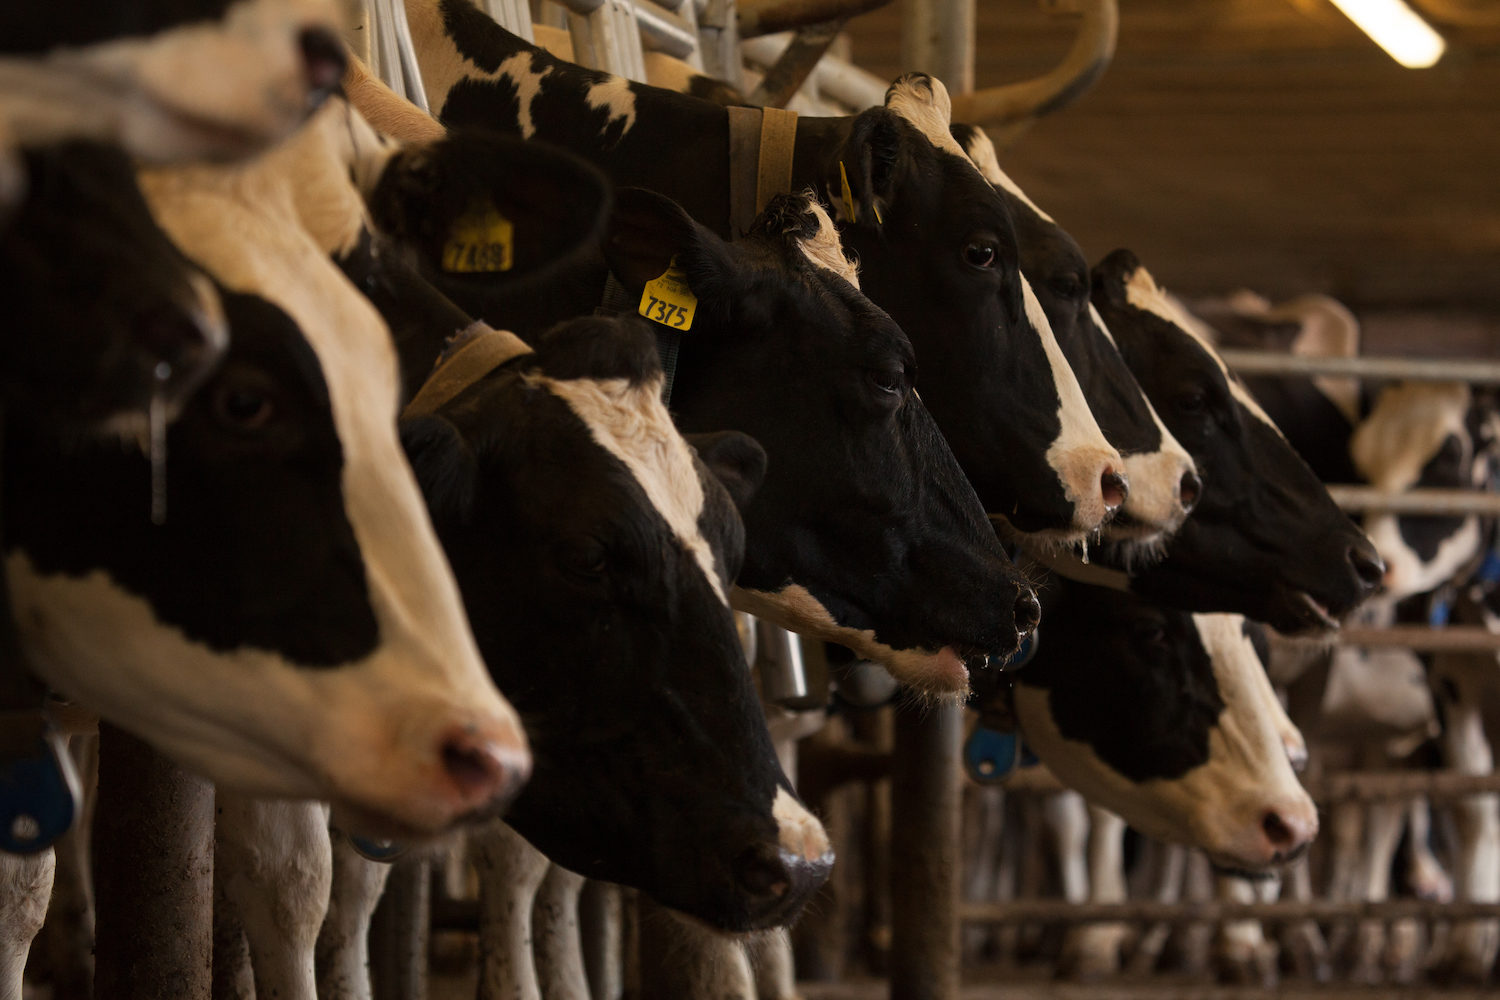 Dairy cattle milked on CAFO farm